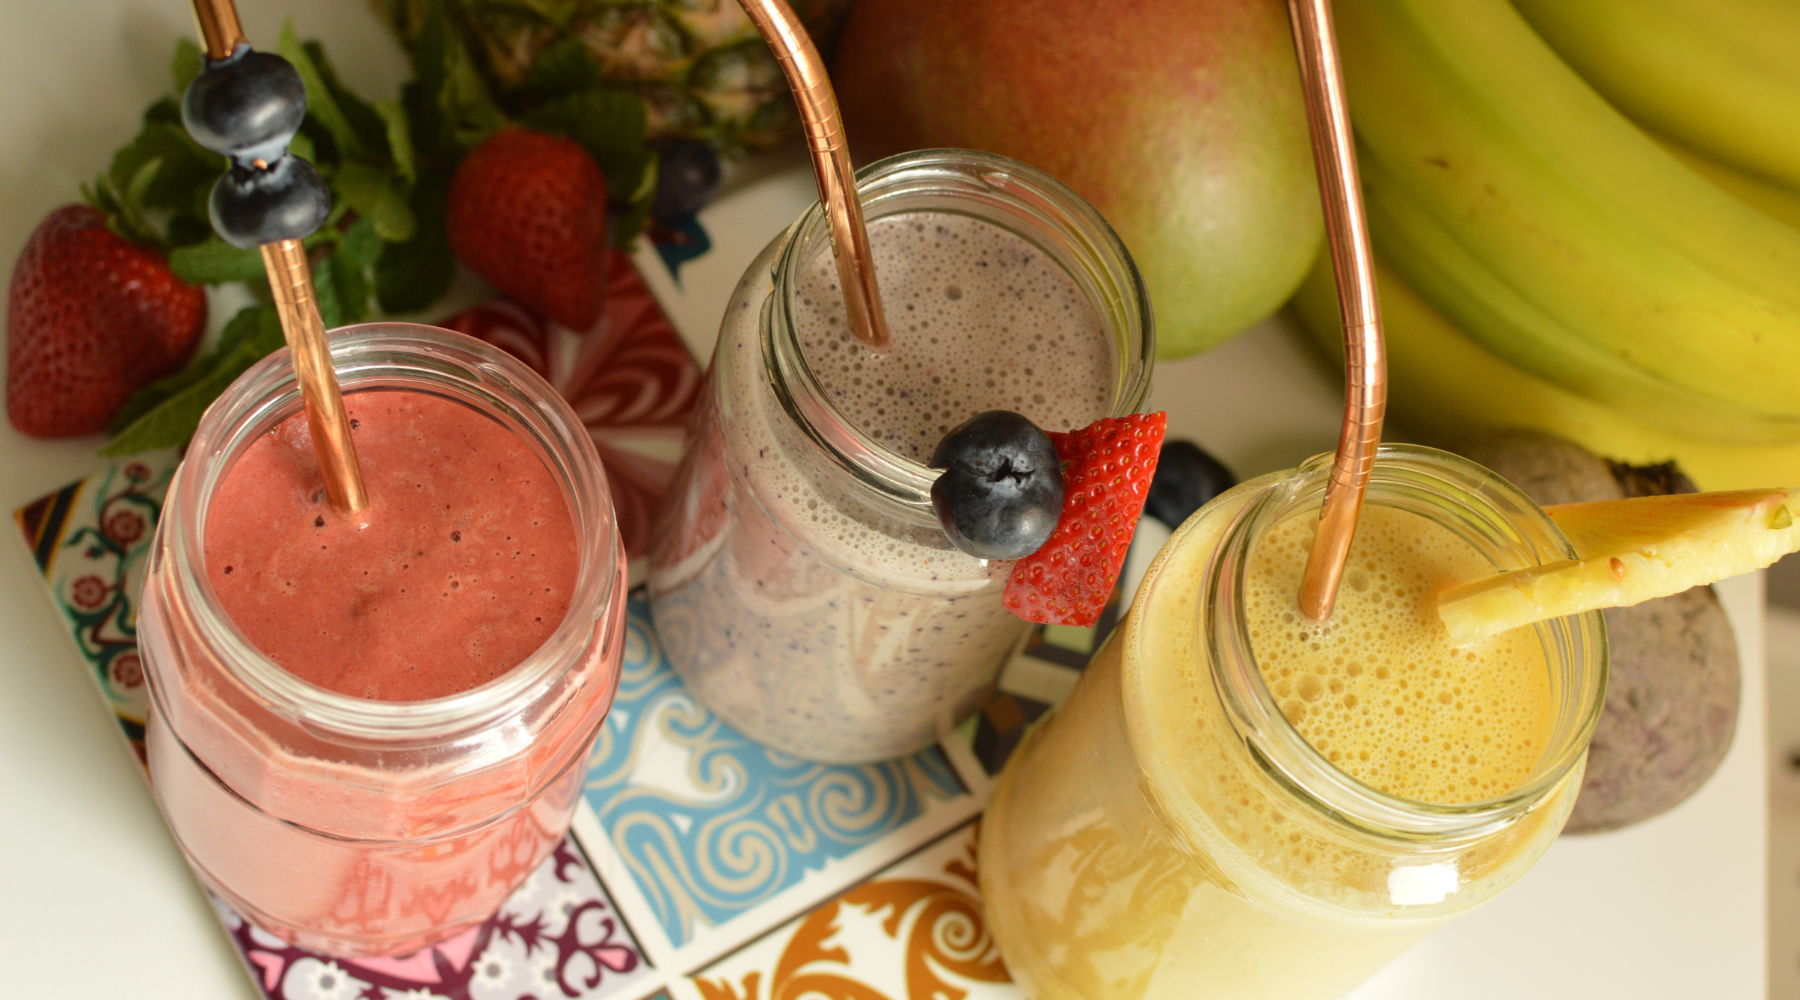 3 DELICIOUS SMOOTHIES USING 3 DIFFERENT NUT BUTTERS